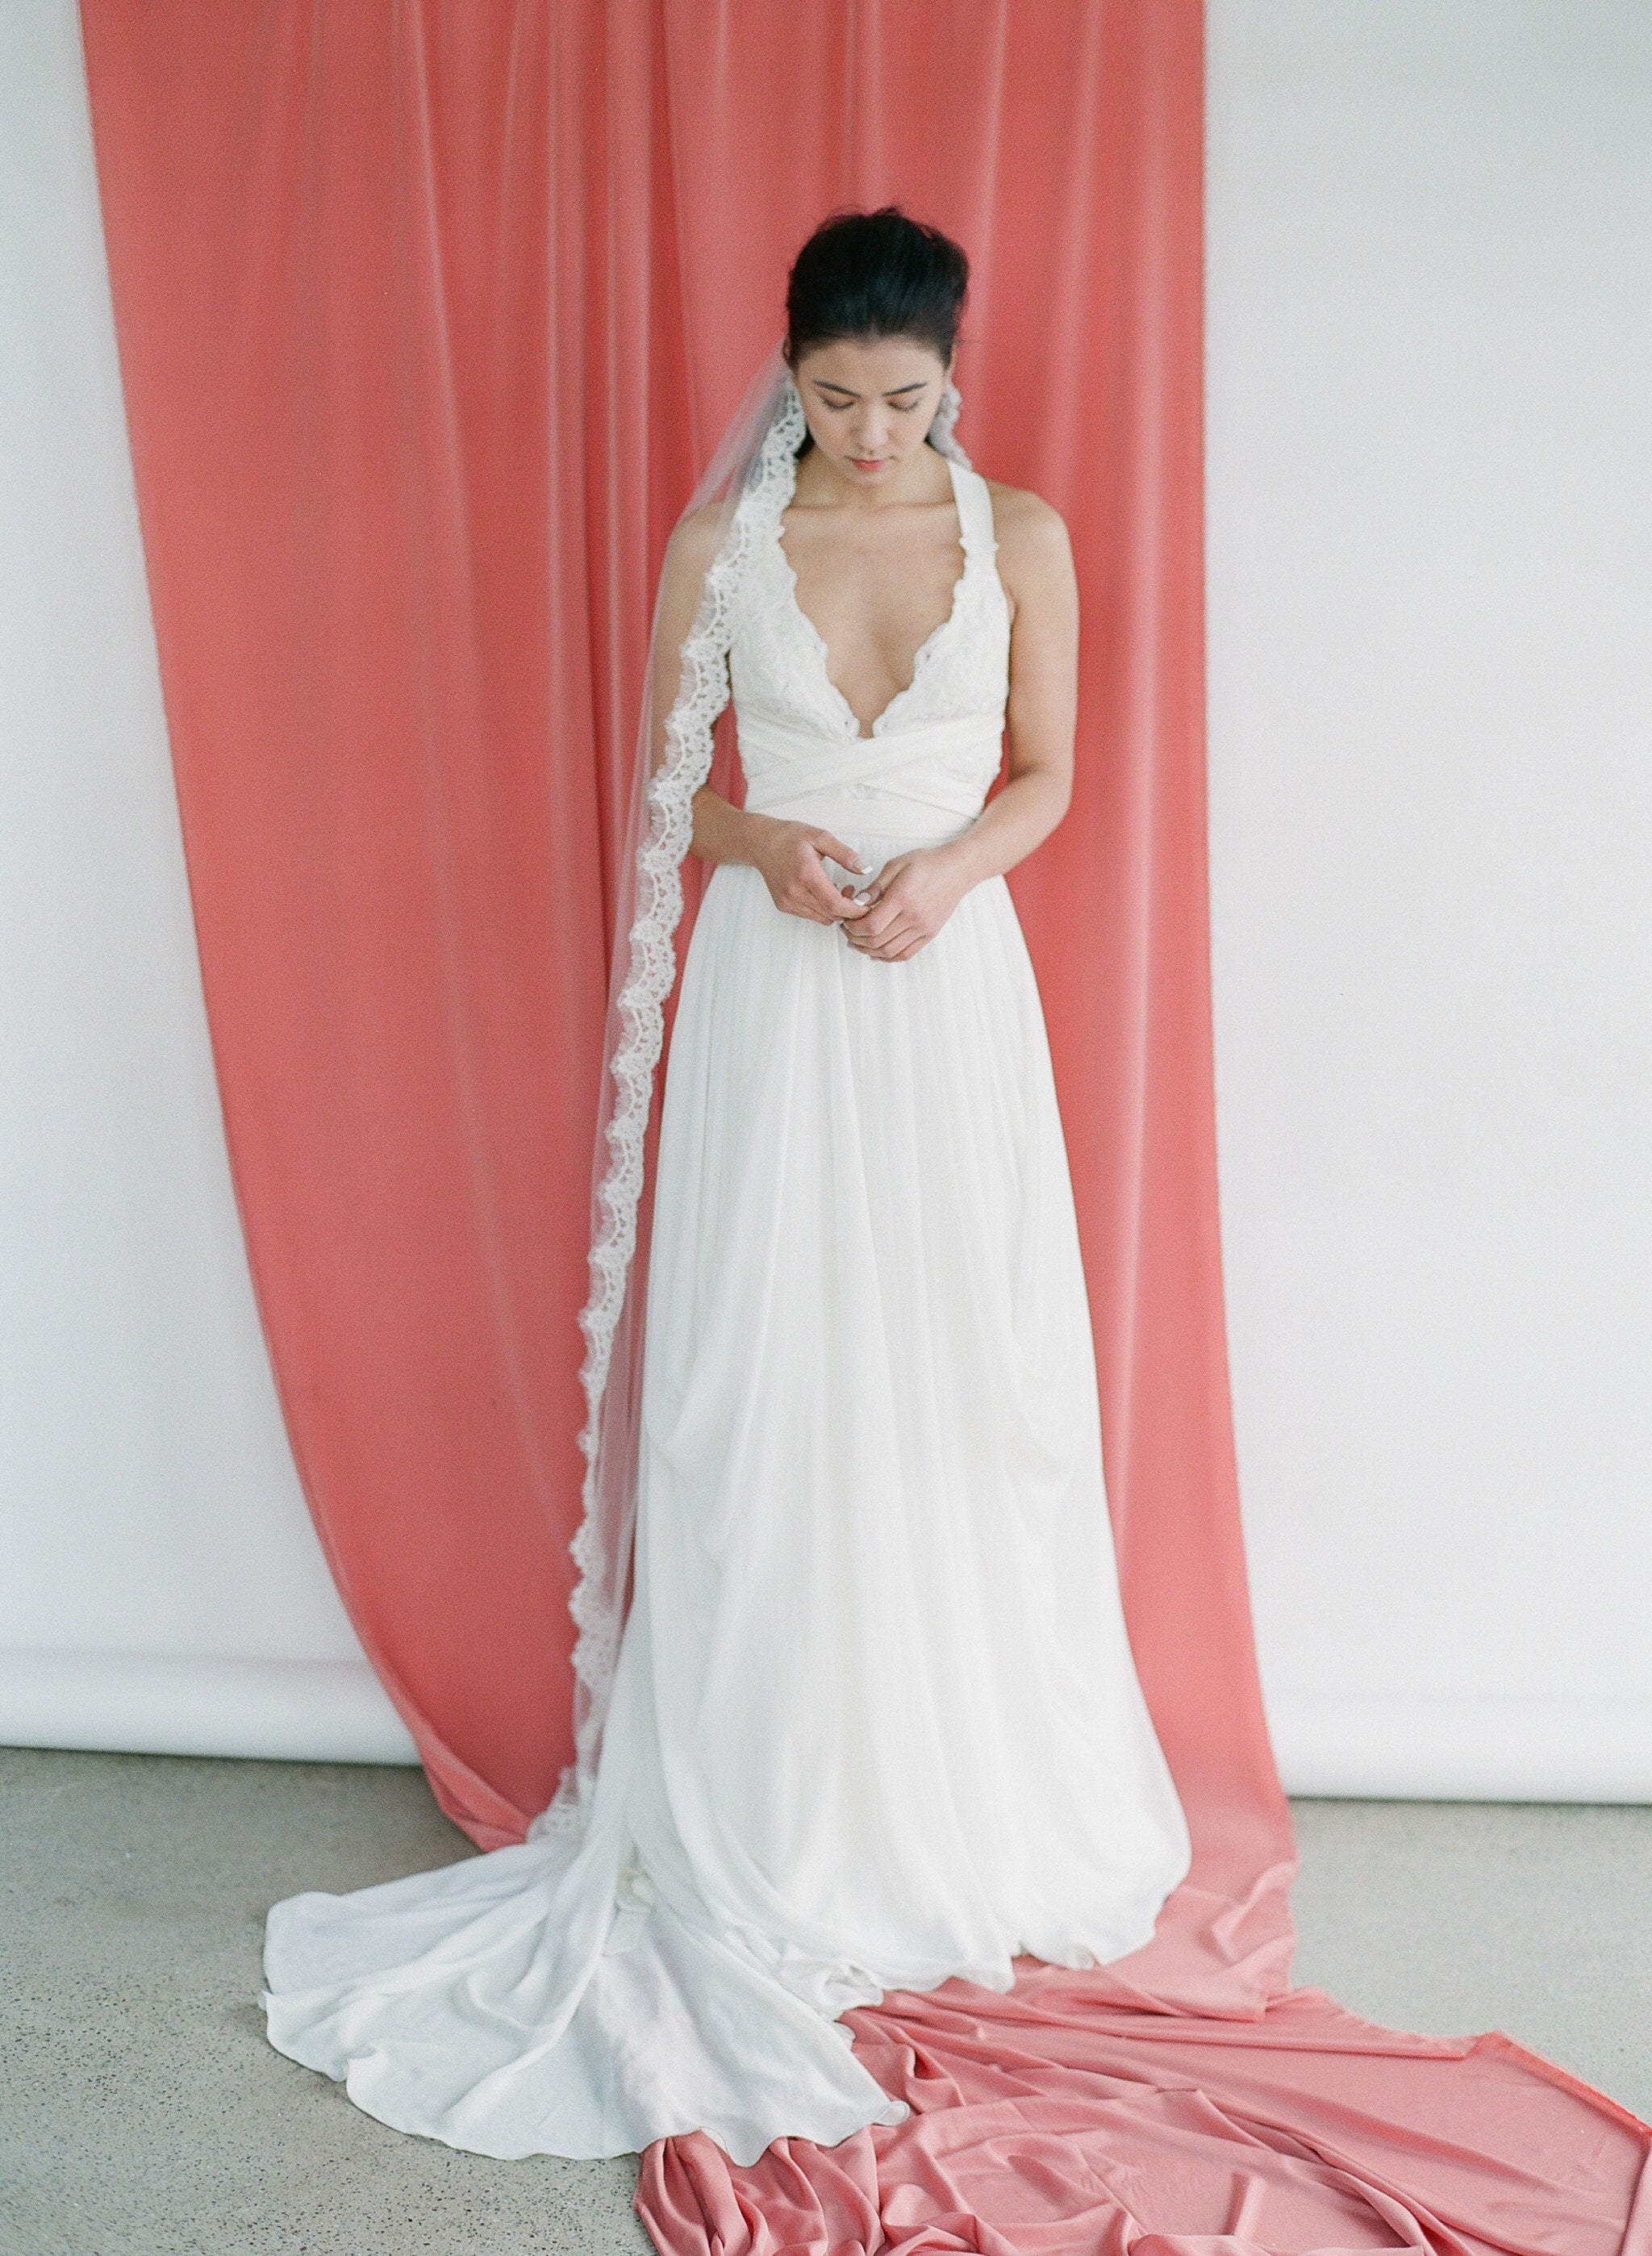 Delicate tulle veil with a French lace trim